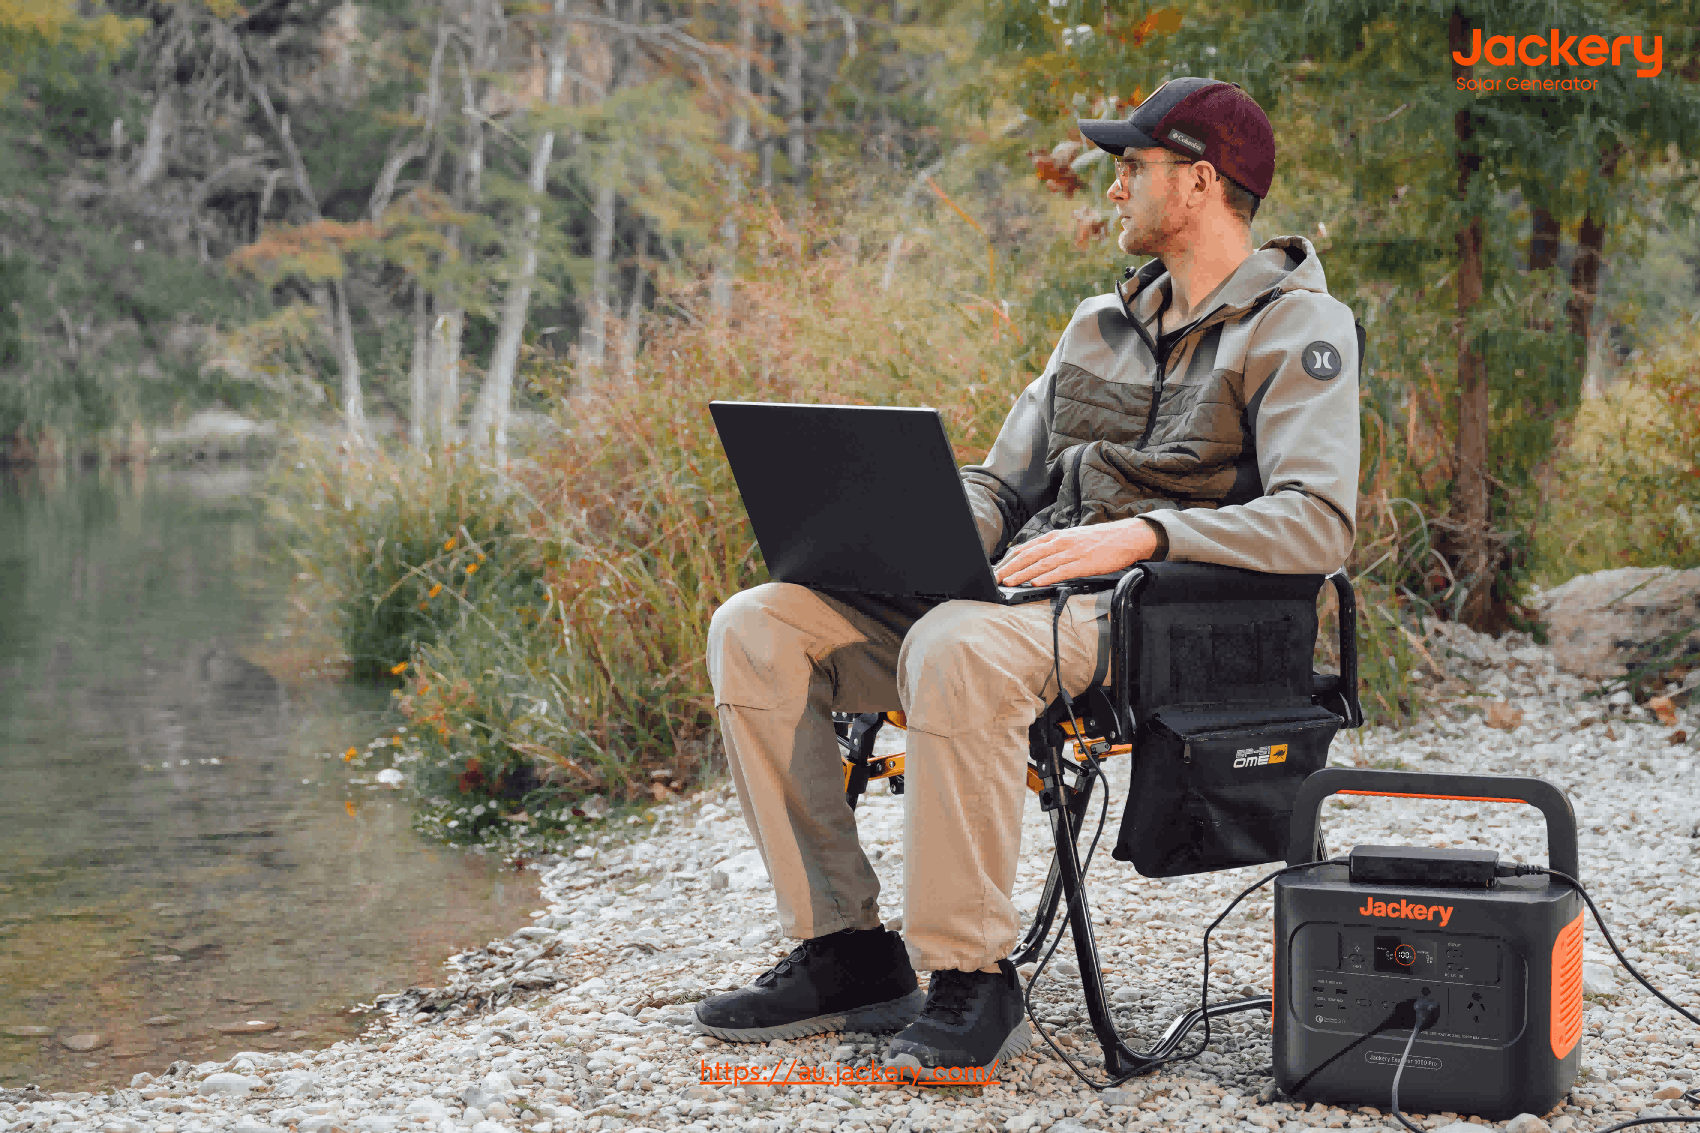 jackery portable power stations for fishing